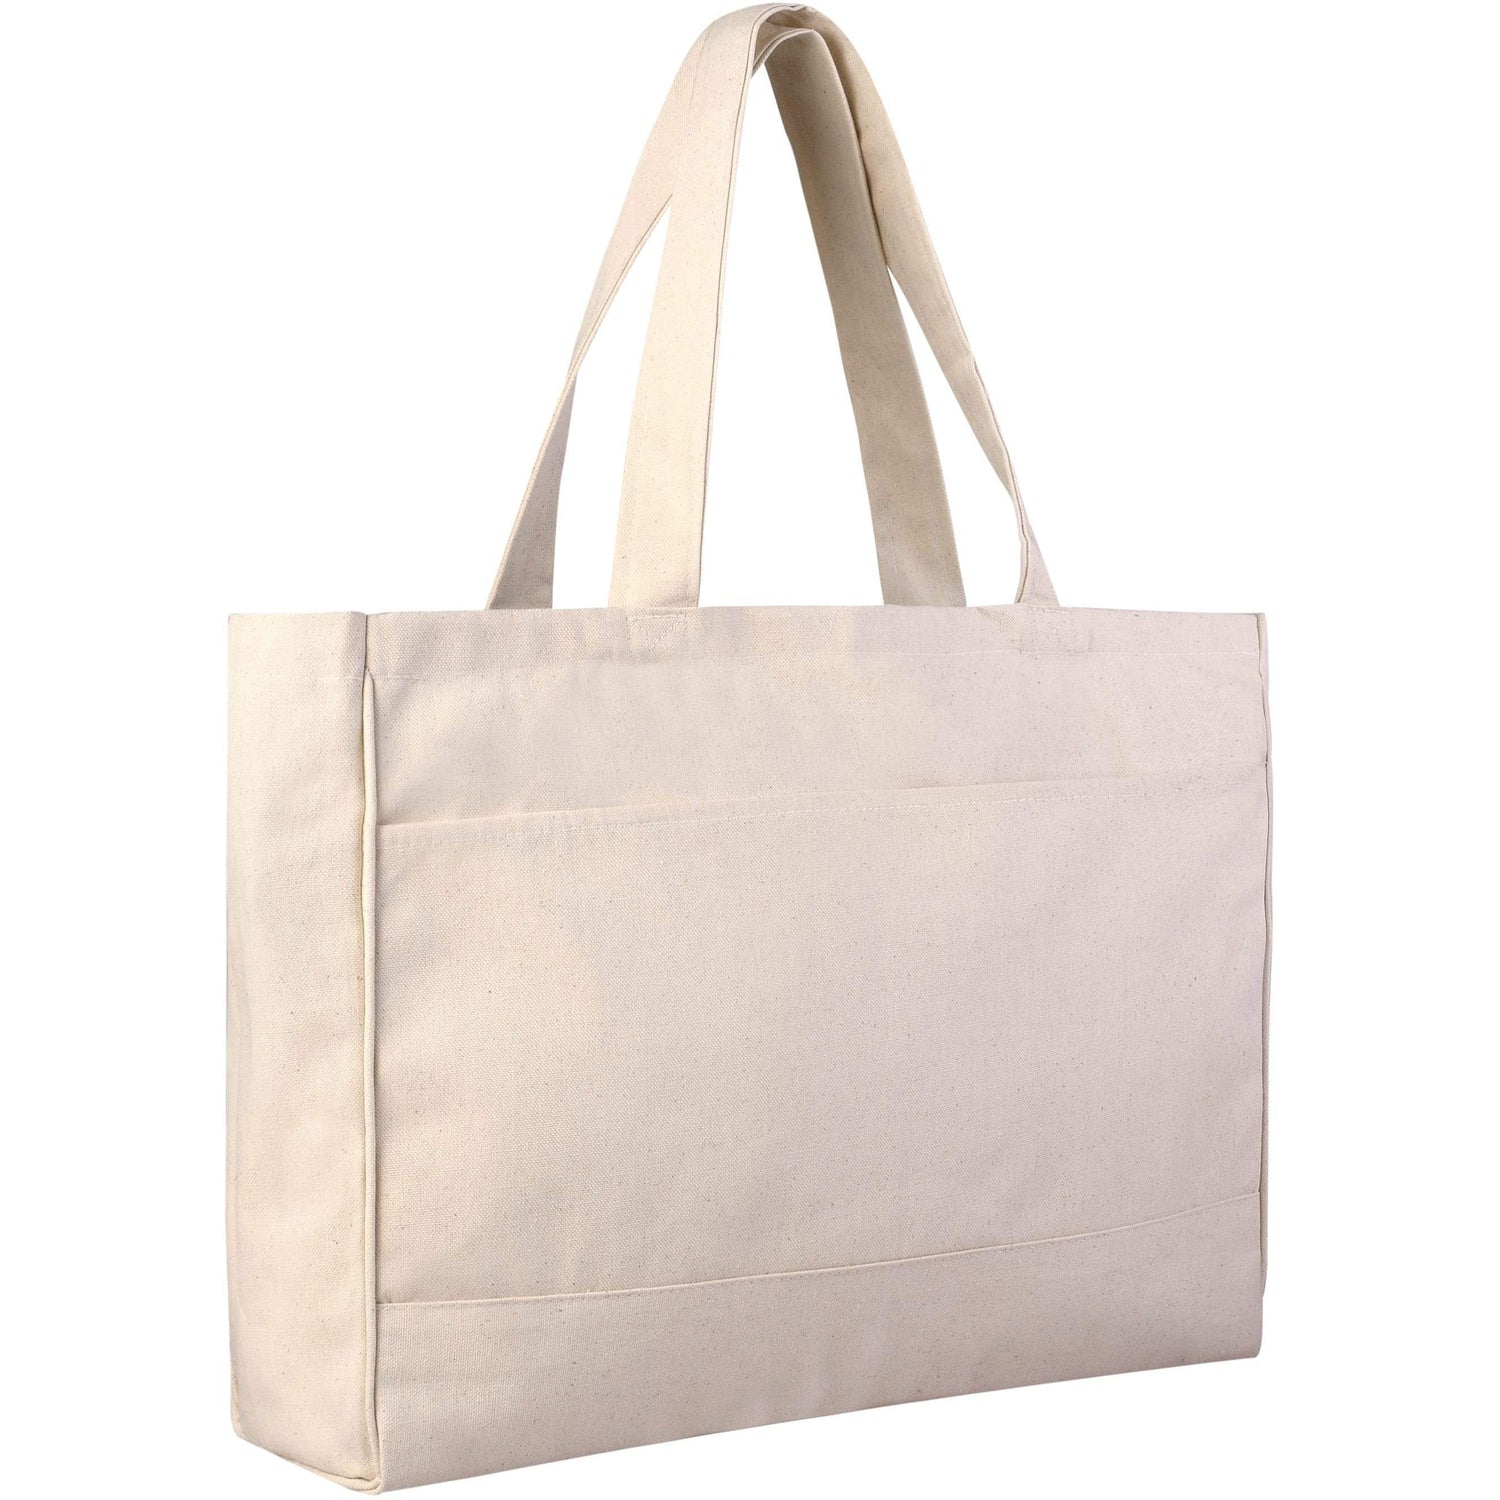 Canvas Tote Bags Wholesale, Large Canvas Tote Bag with Zipper Pocket – BagzDepot™